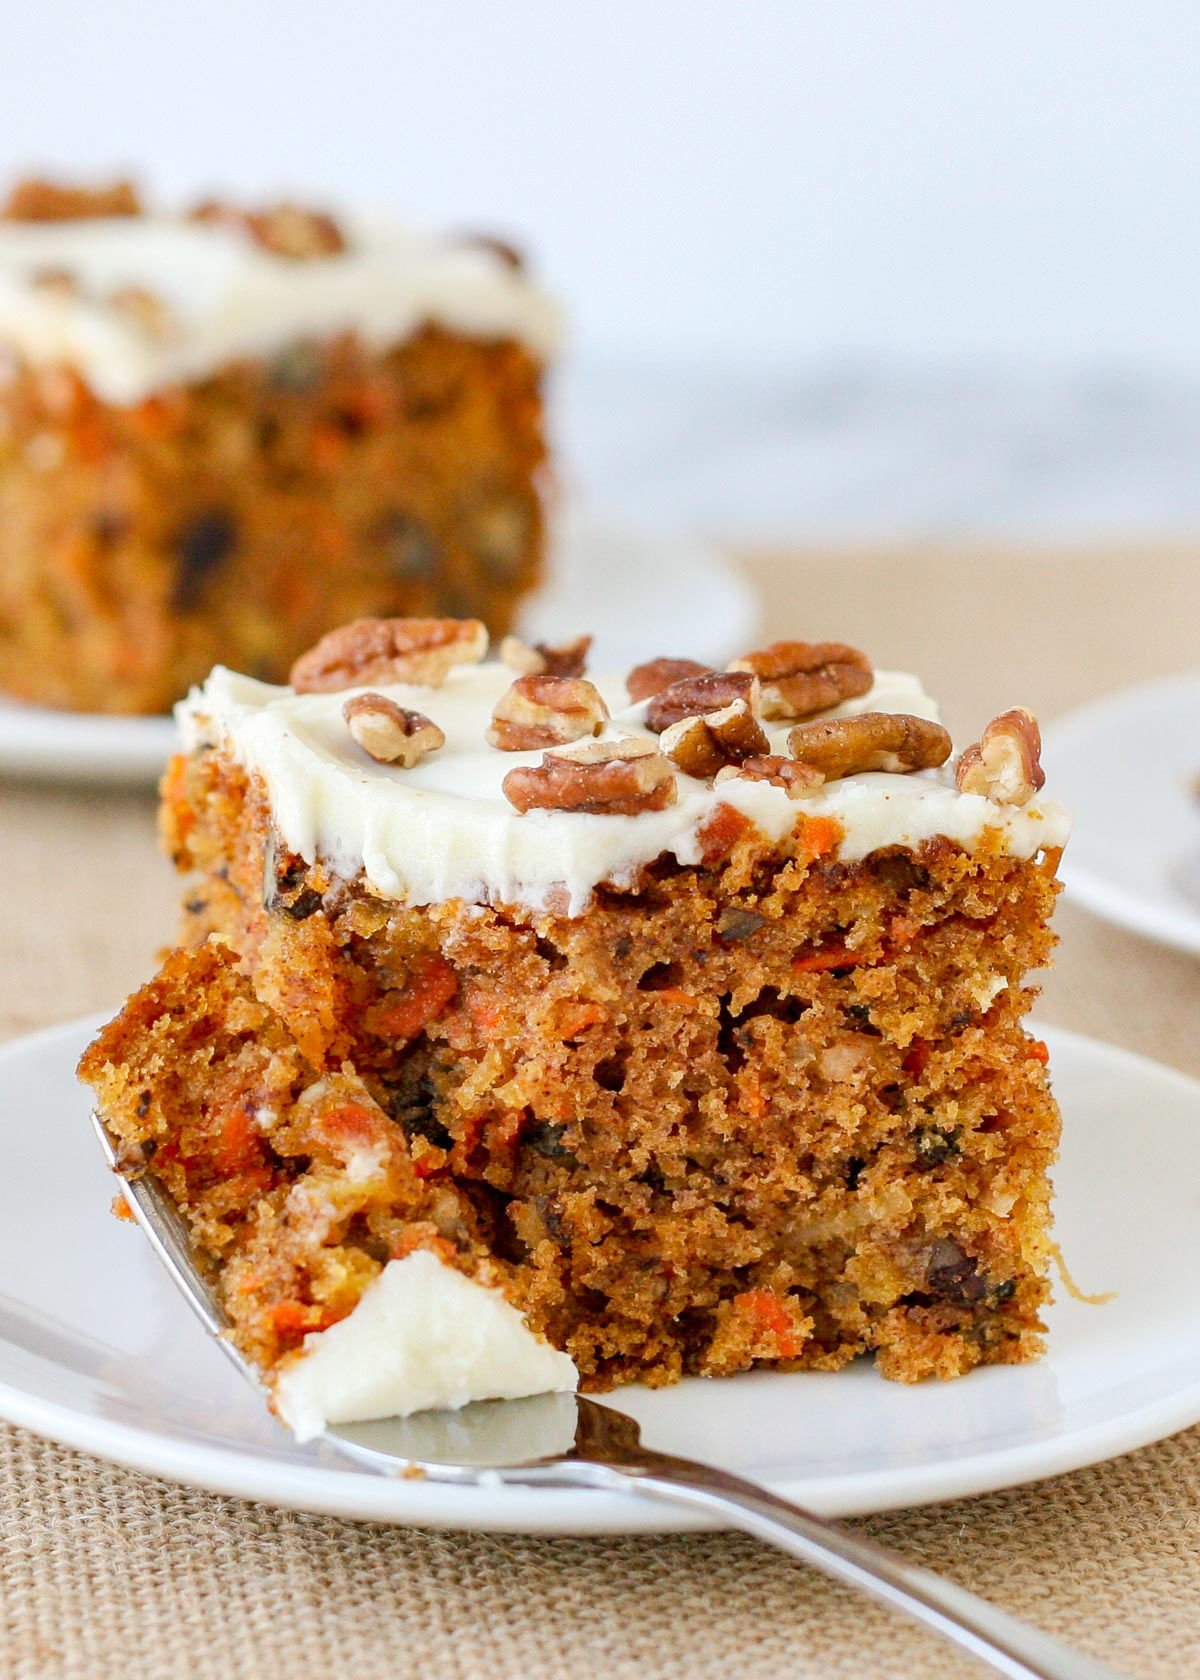 piece of carrot cake with a bite taken and the fork resting on the side of the white plate. two more pieces of carrot cake can be seen in the background.